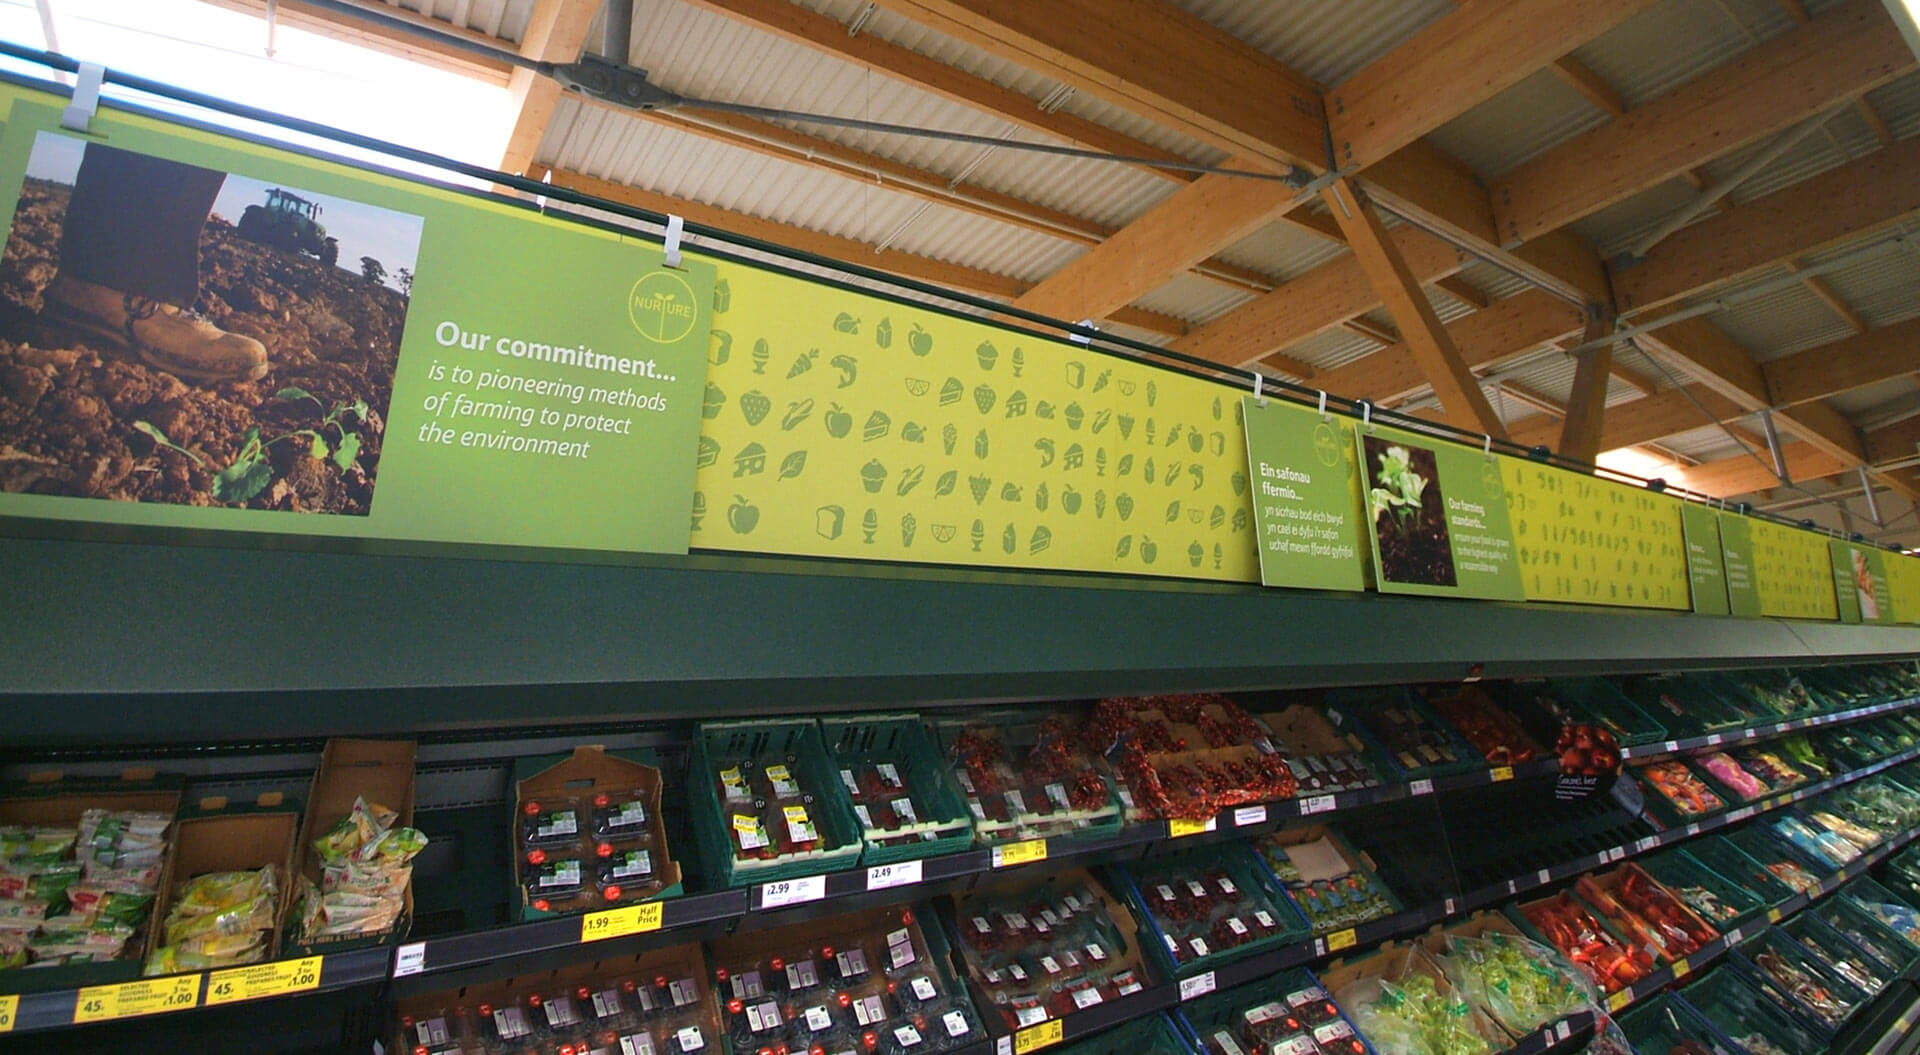 Tesco supermarket welshpool fruit and vegetable merchandising system and graphic communications